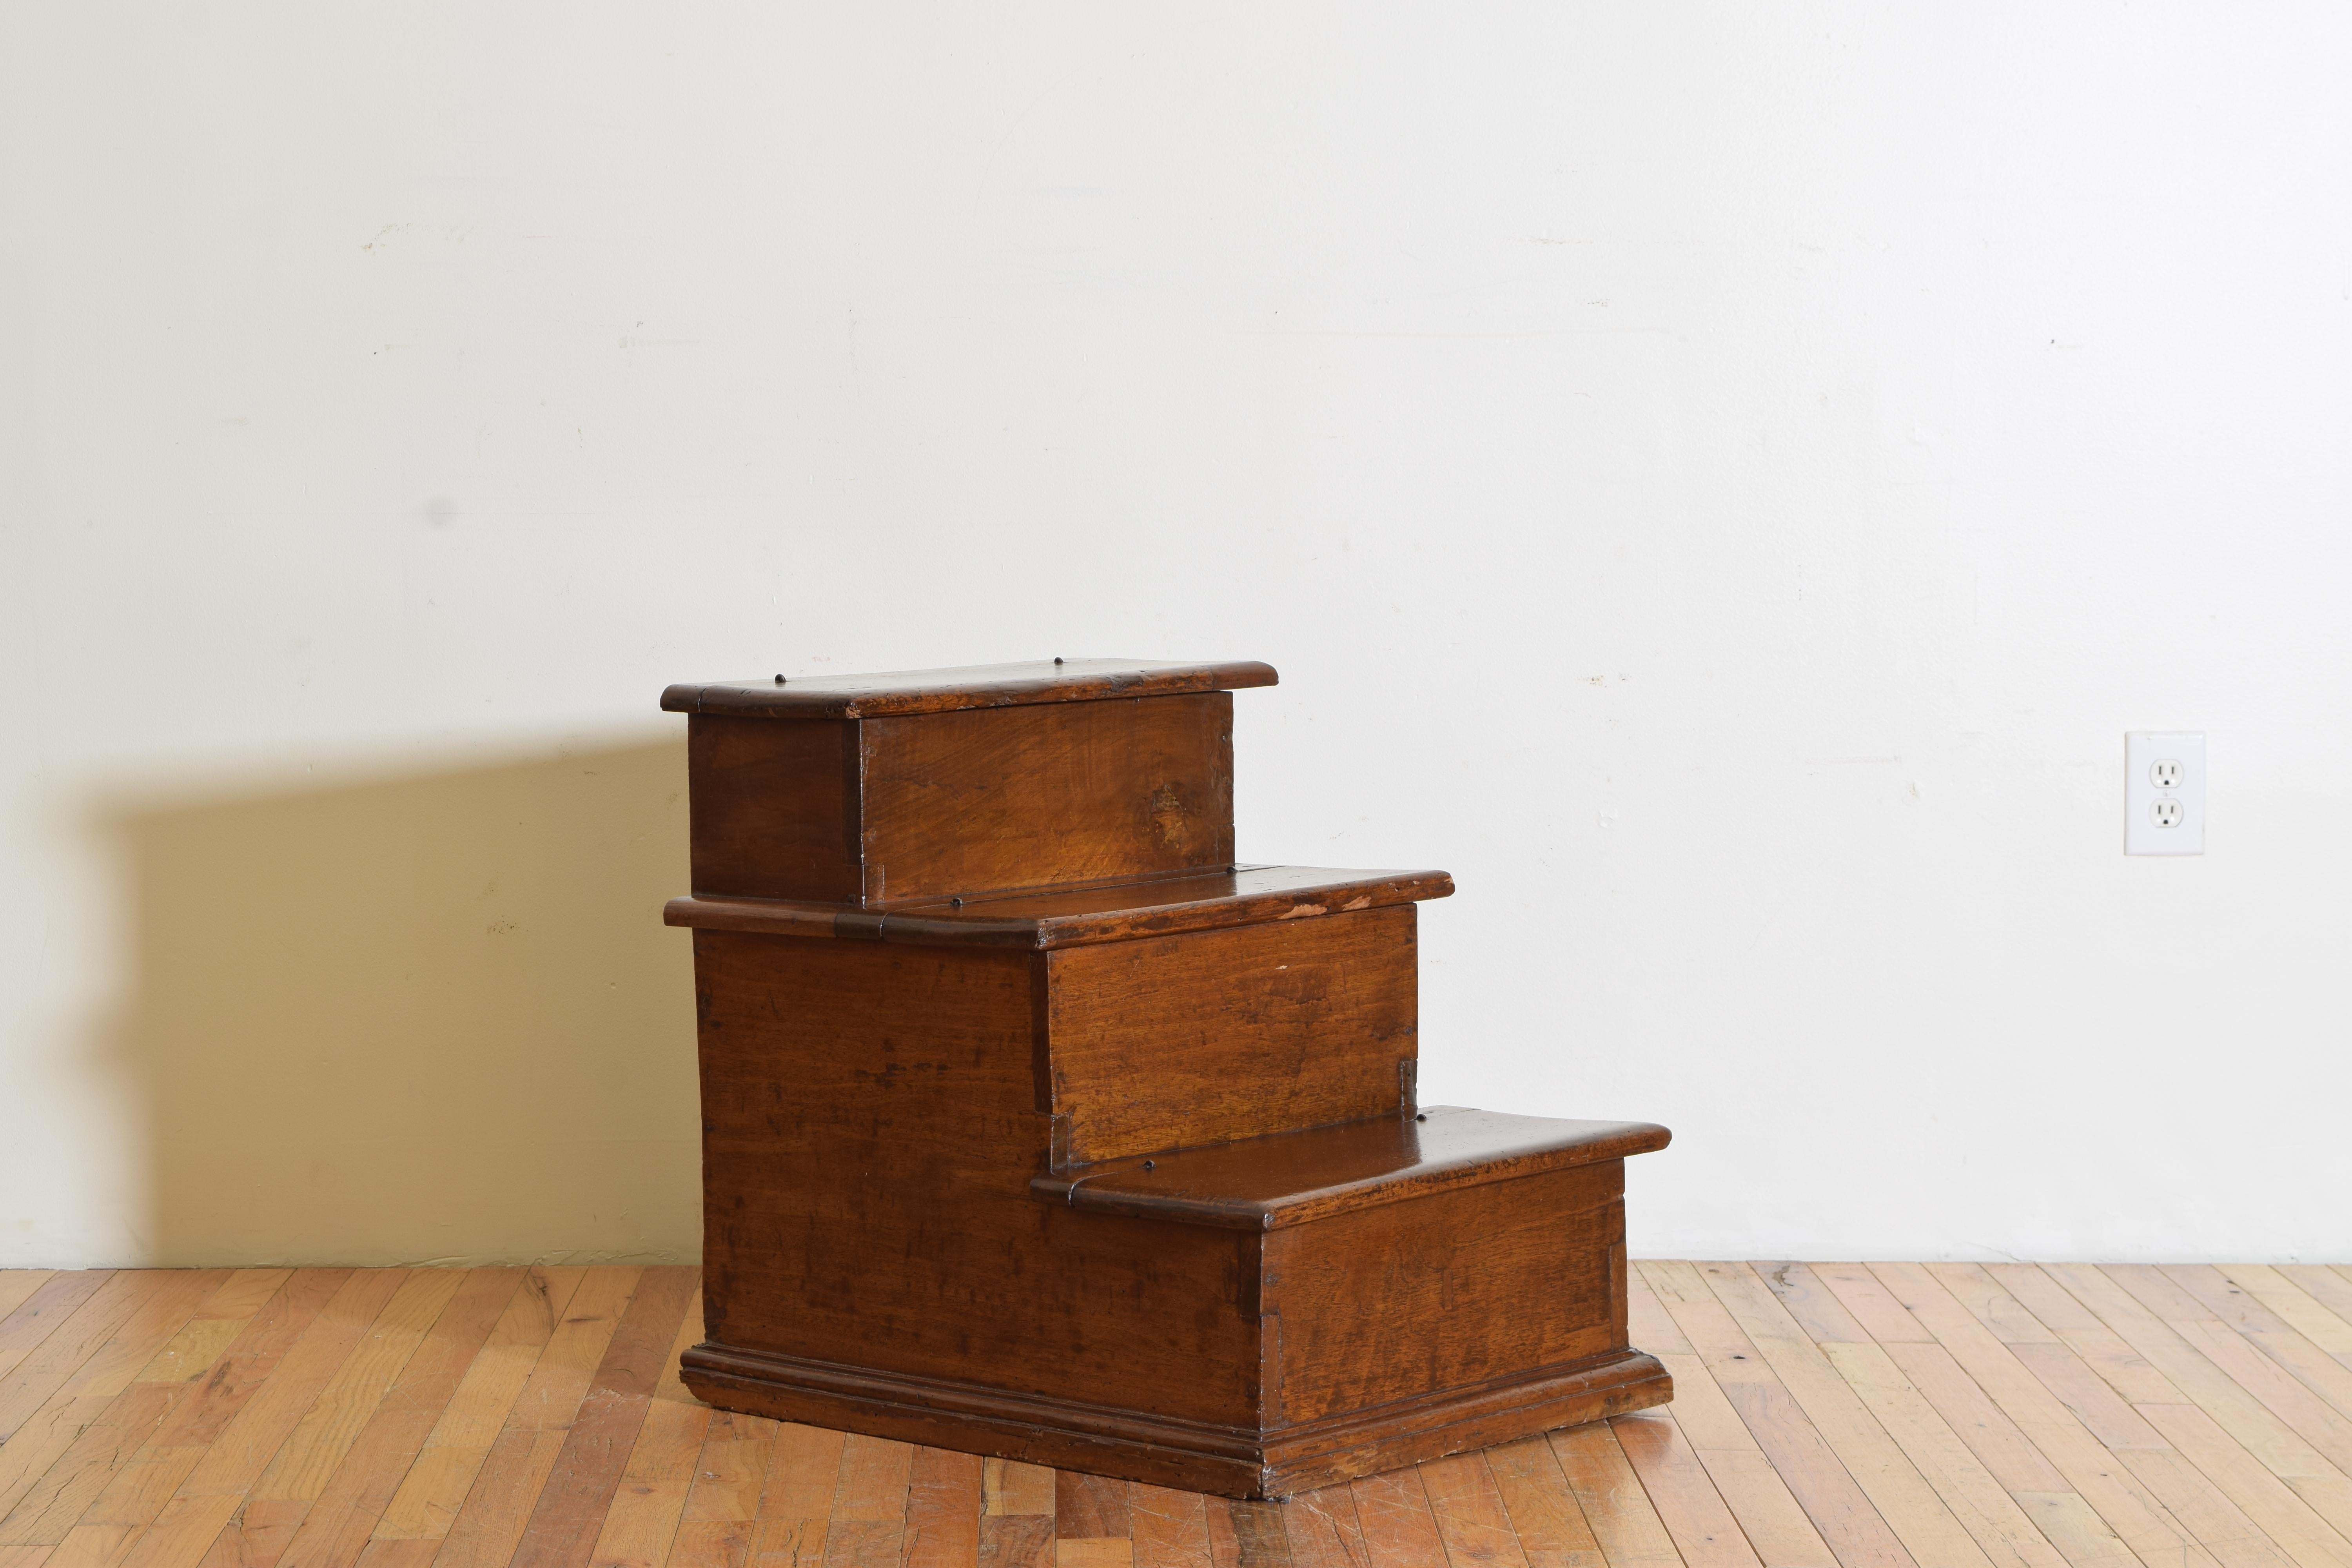 Highly functional and useful library steps with a wonderful patina, having three shaped steps with molded edges raised on a plinth-form base, each hinged step lifting to reveal a storage compartment.